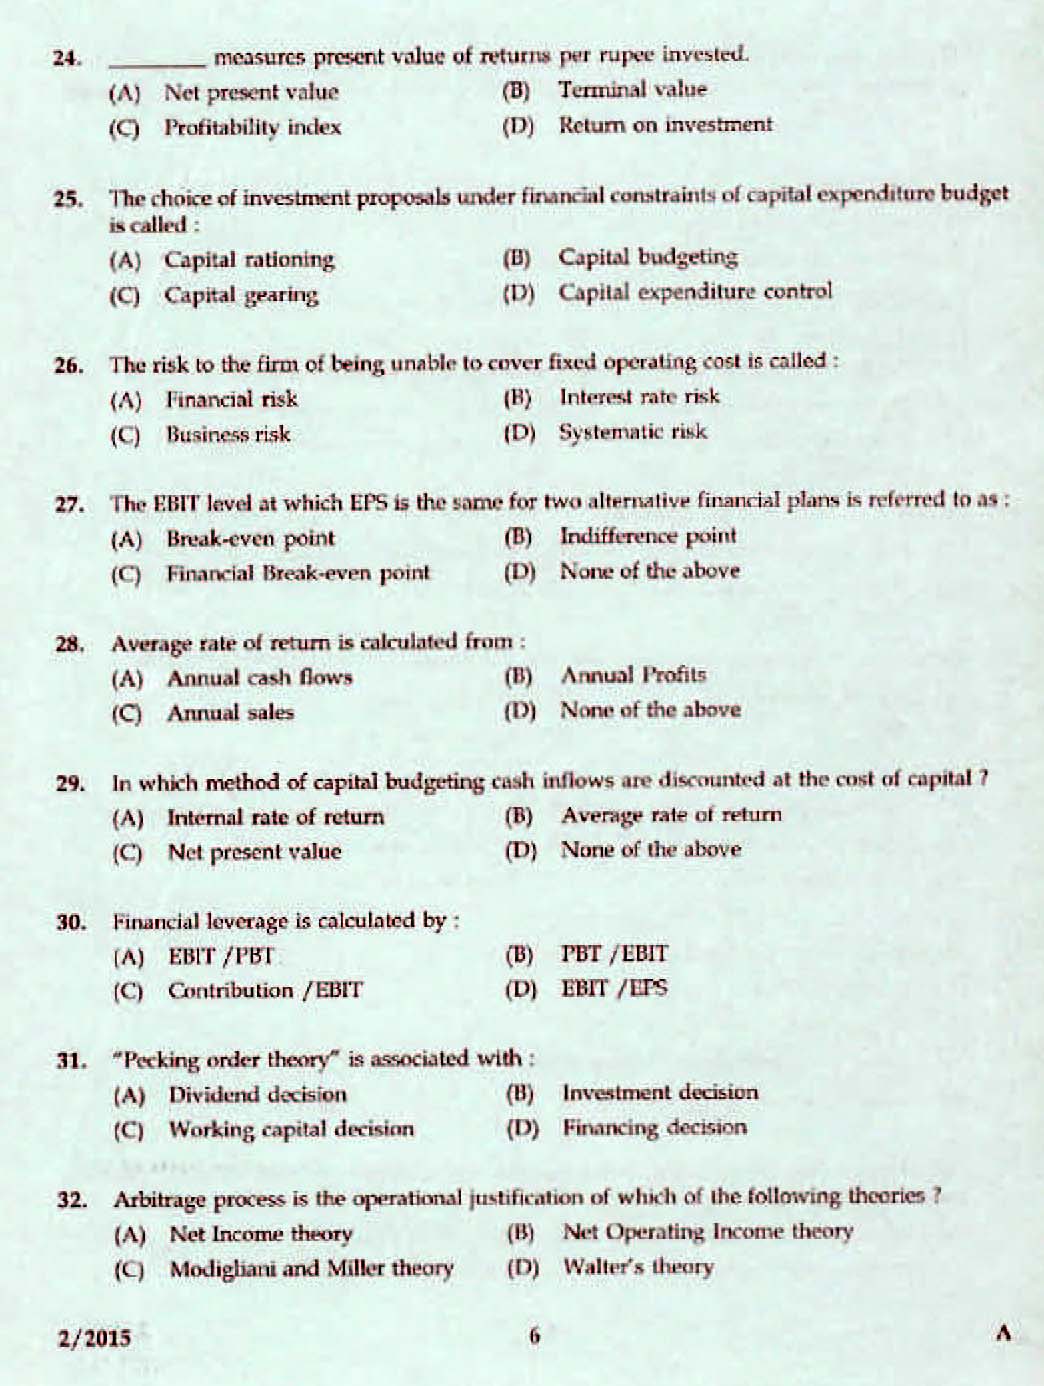 Kerala PSC Accounts Officer OMR Exam 2015 Question Paper Code 22015 4